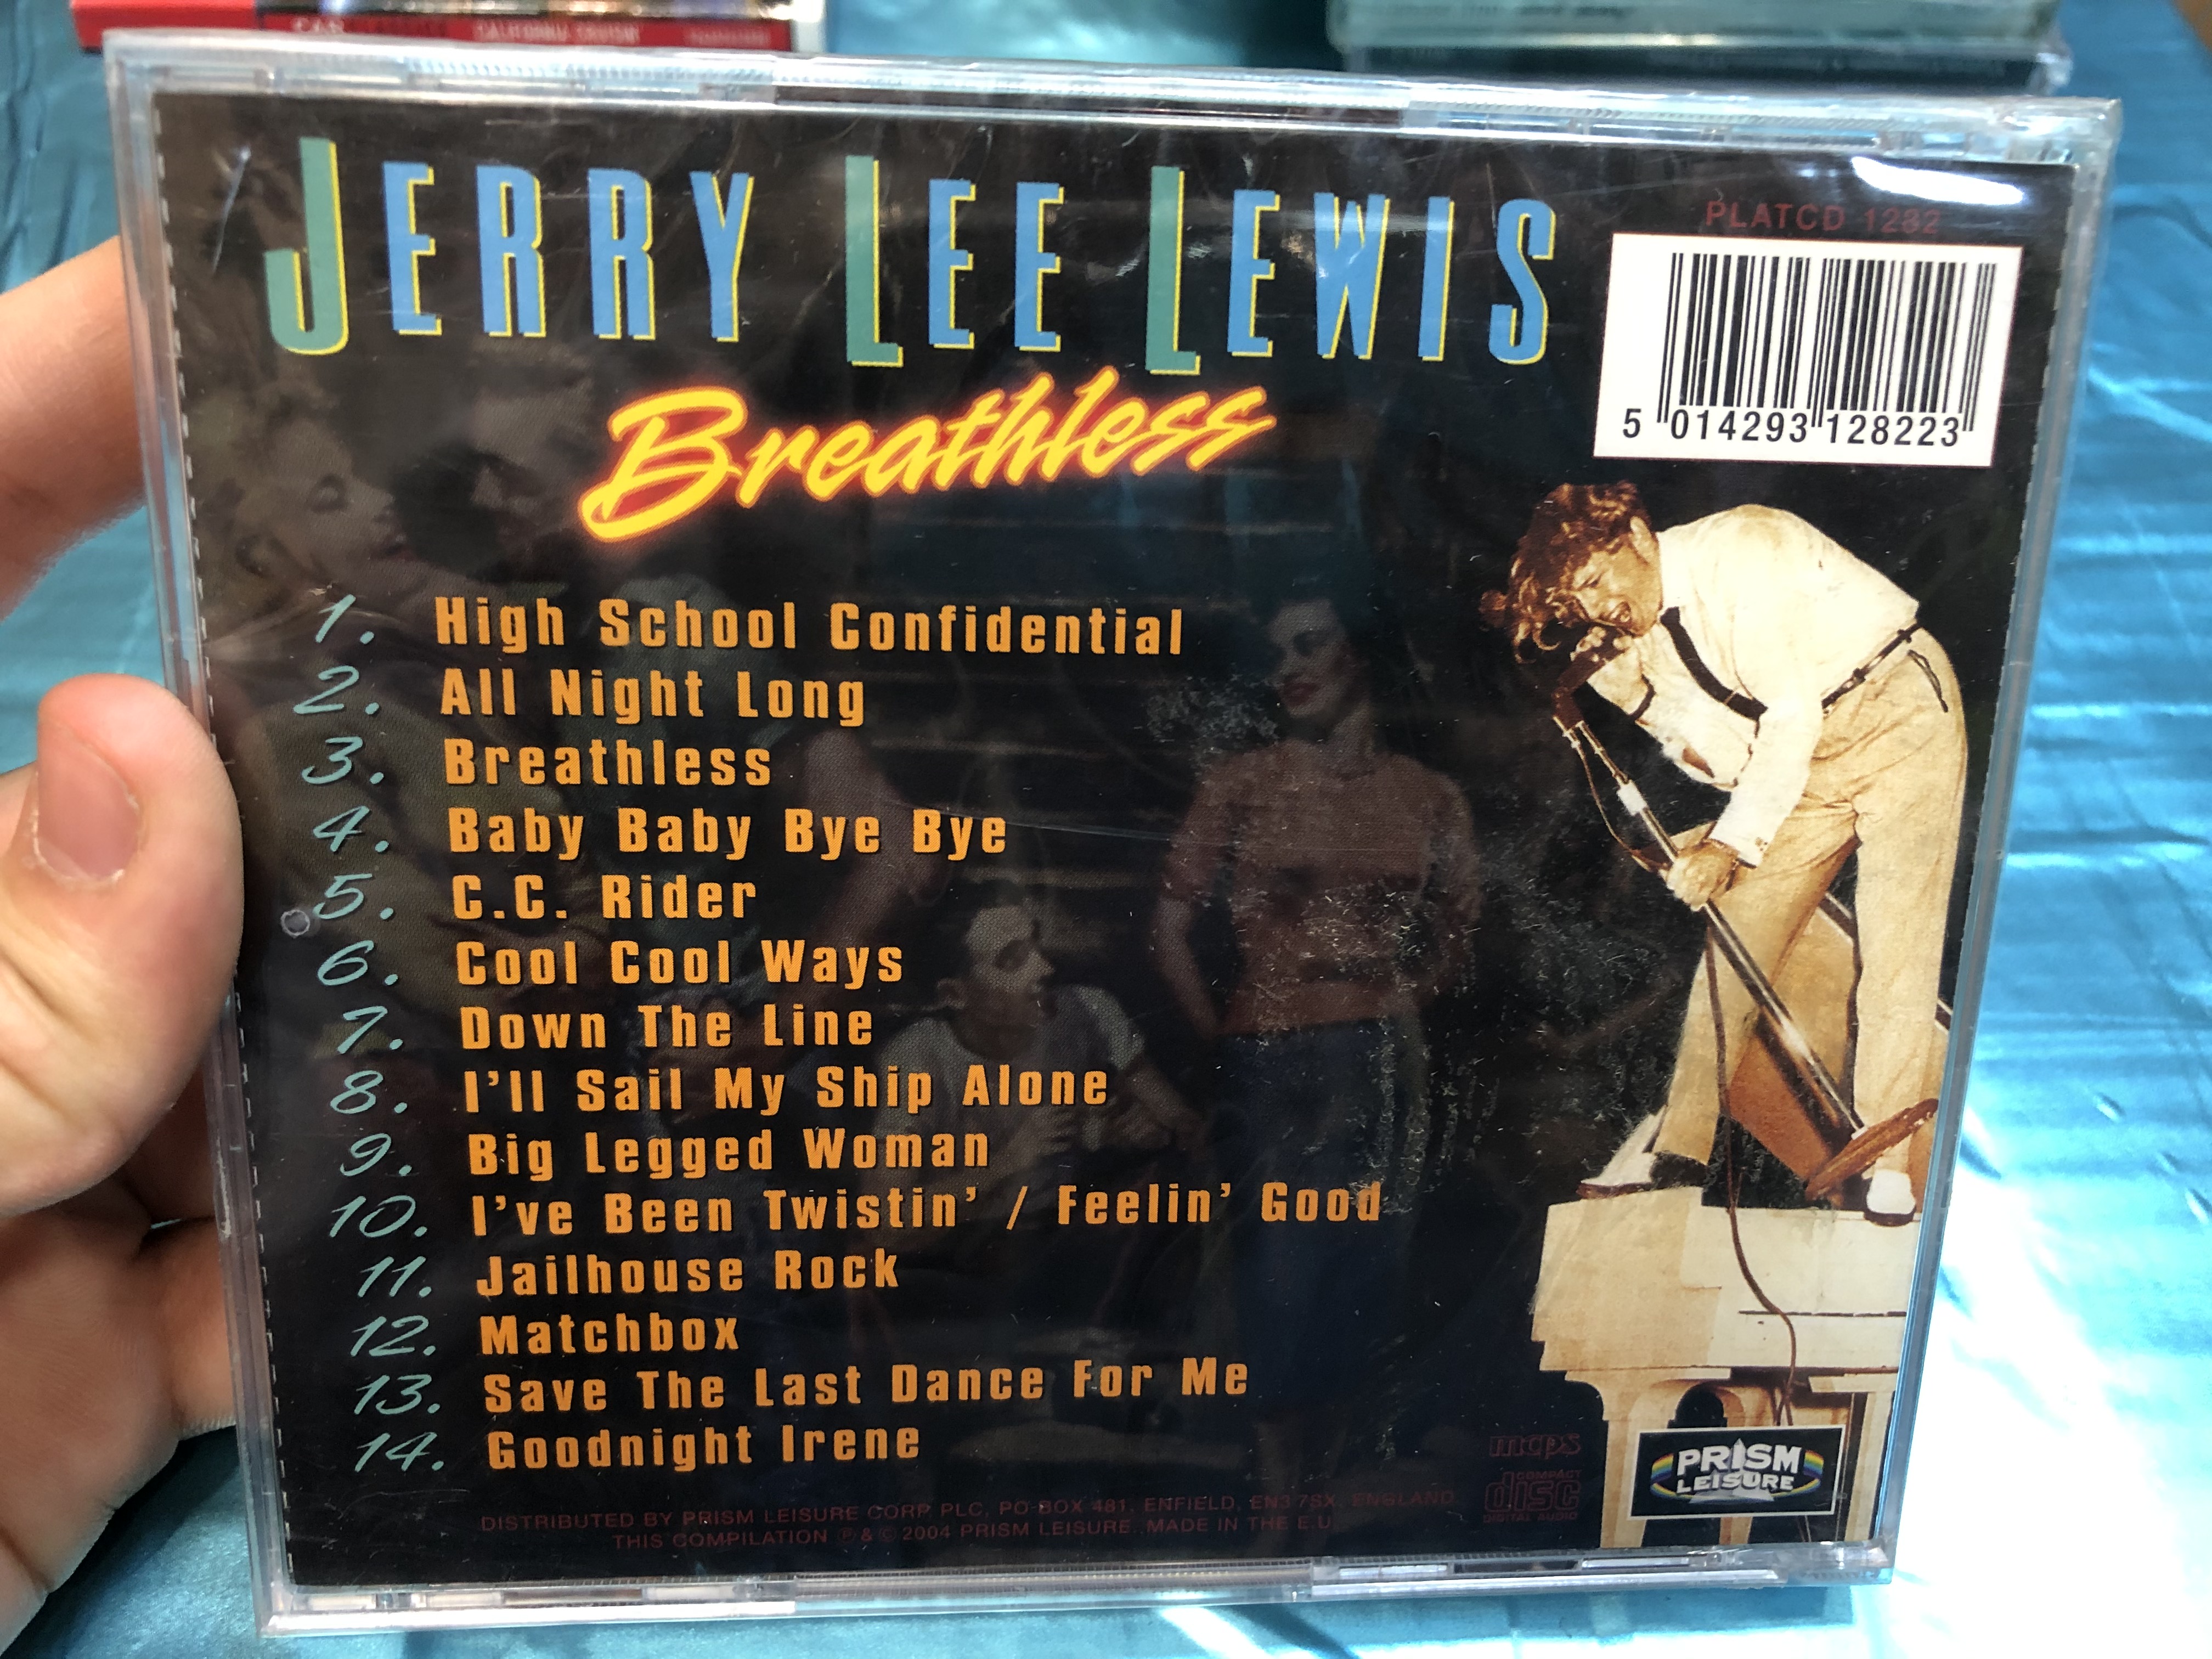 jerry-lee-lewis-breathless-14-original-hits-including-high-school-confidential-down-the-line-c.c.-rider-and-matchbox-prism-leisure-audio-cd-2004-platcd-1282-3-.jpg